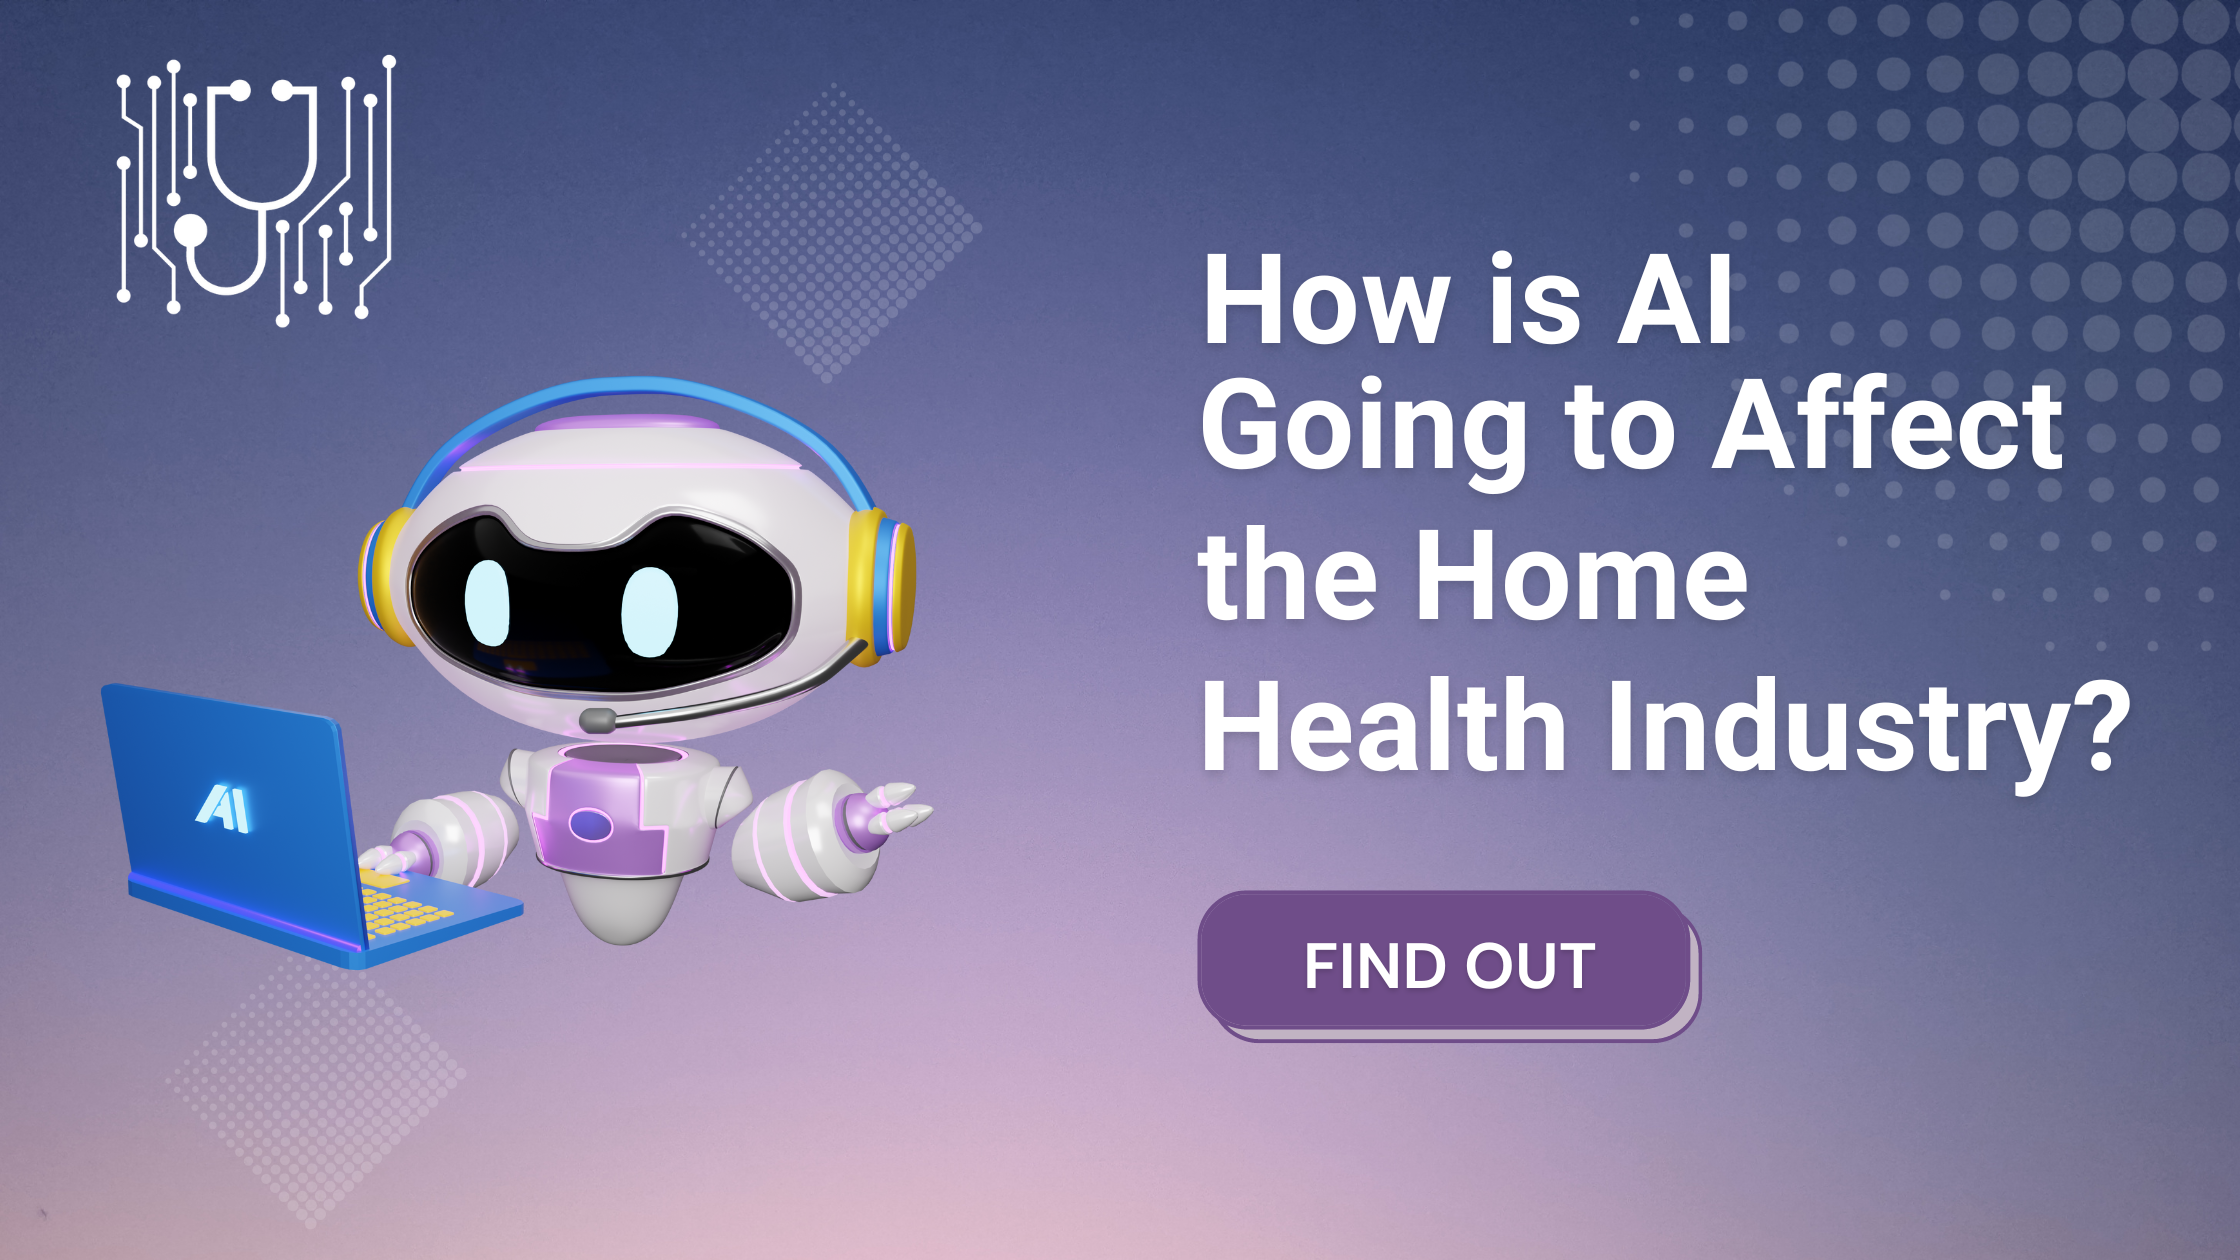 How is AI Going to Affect the Home Health Industry?